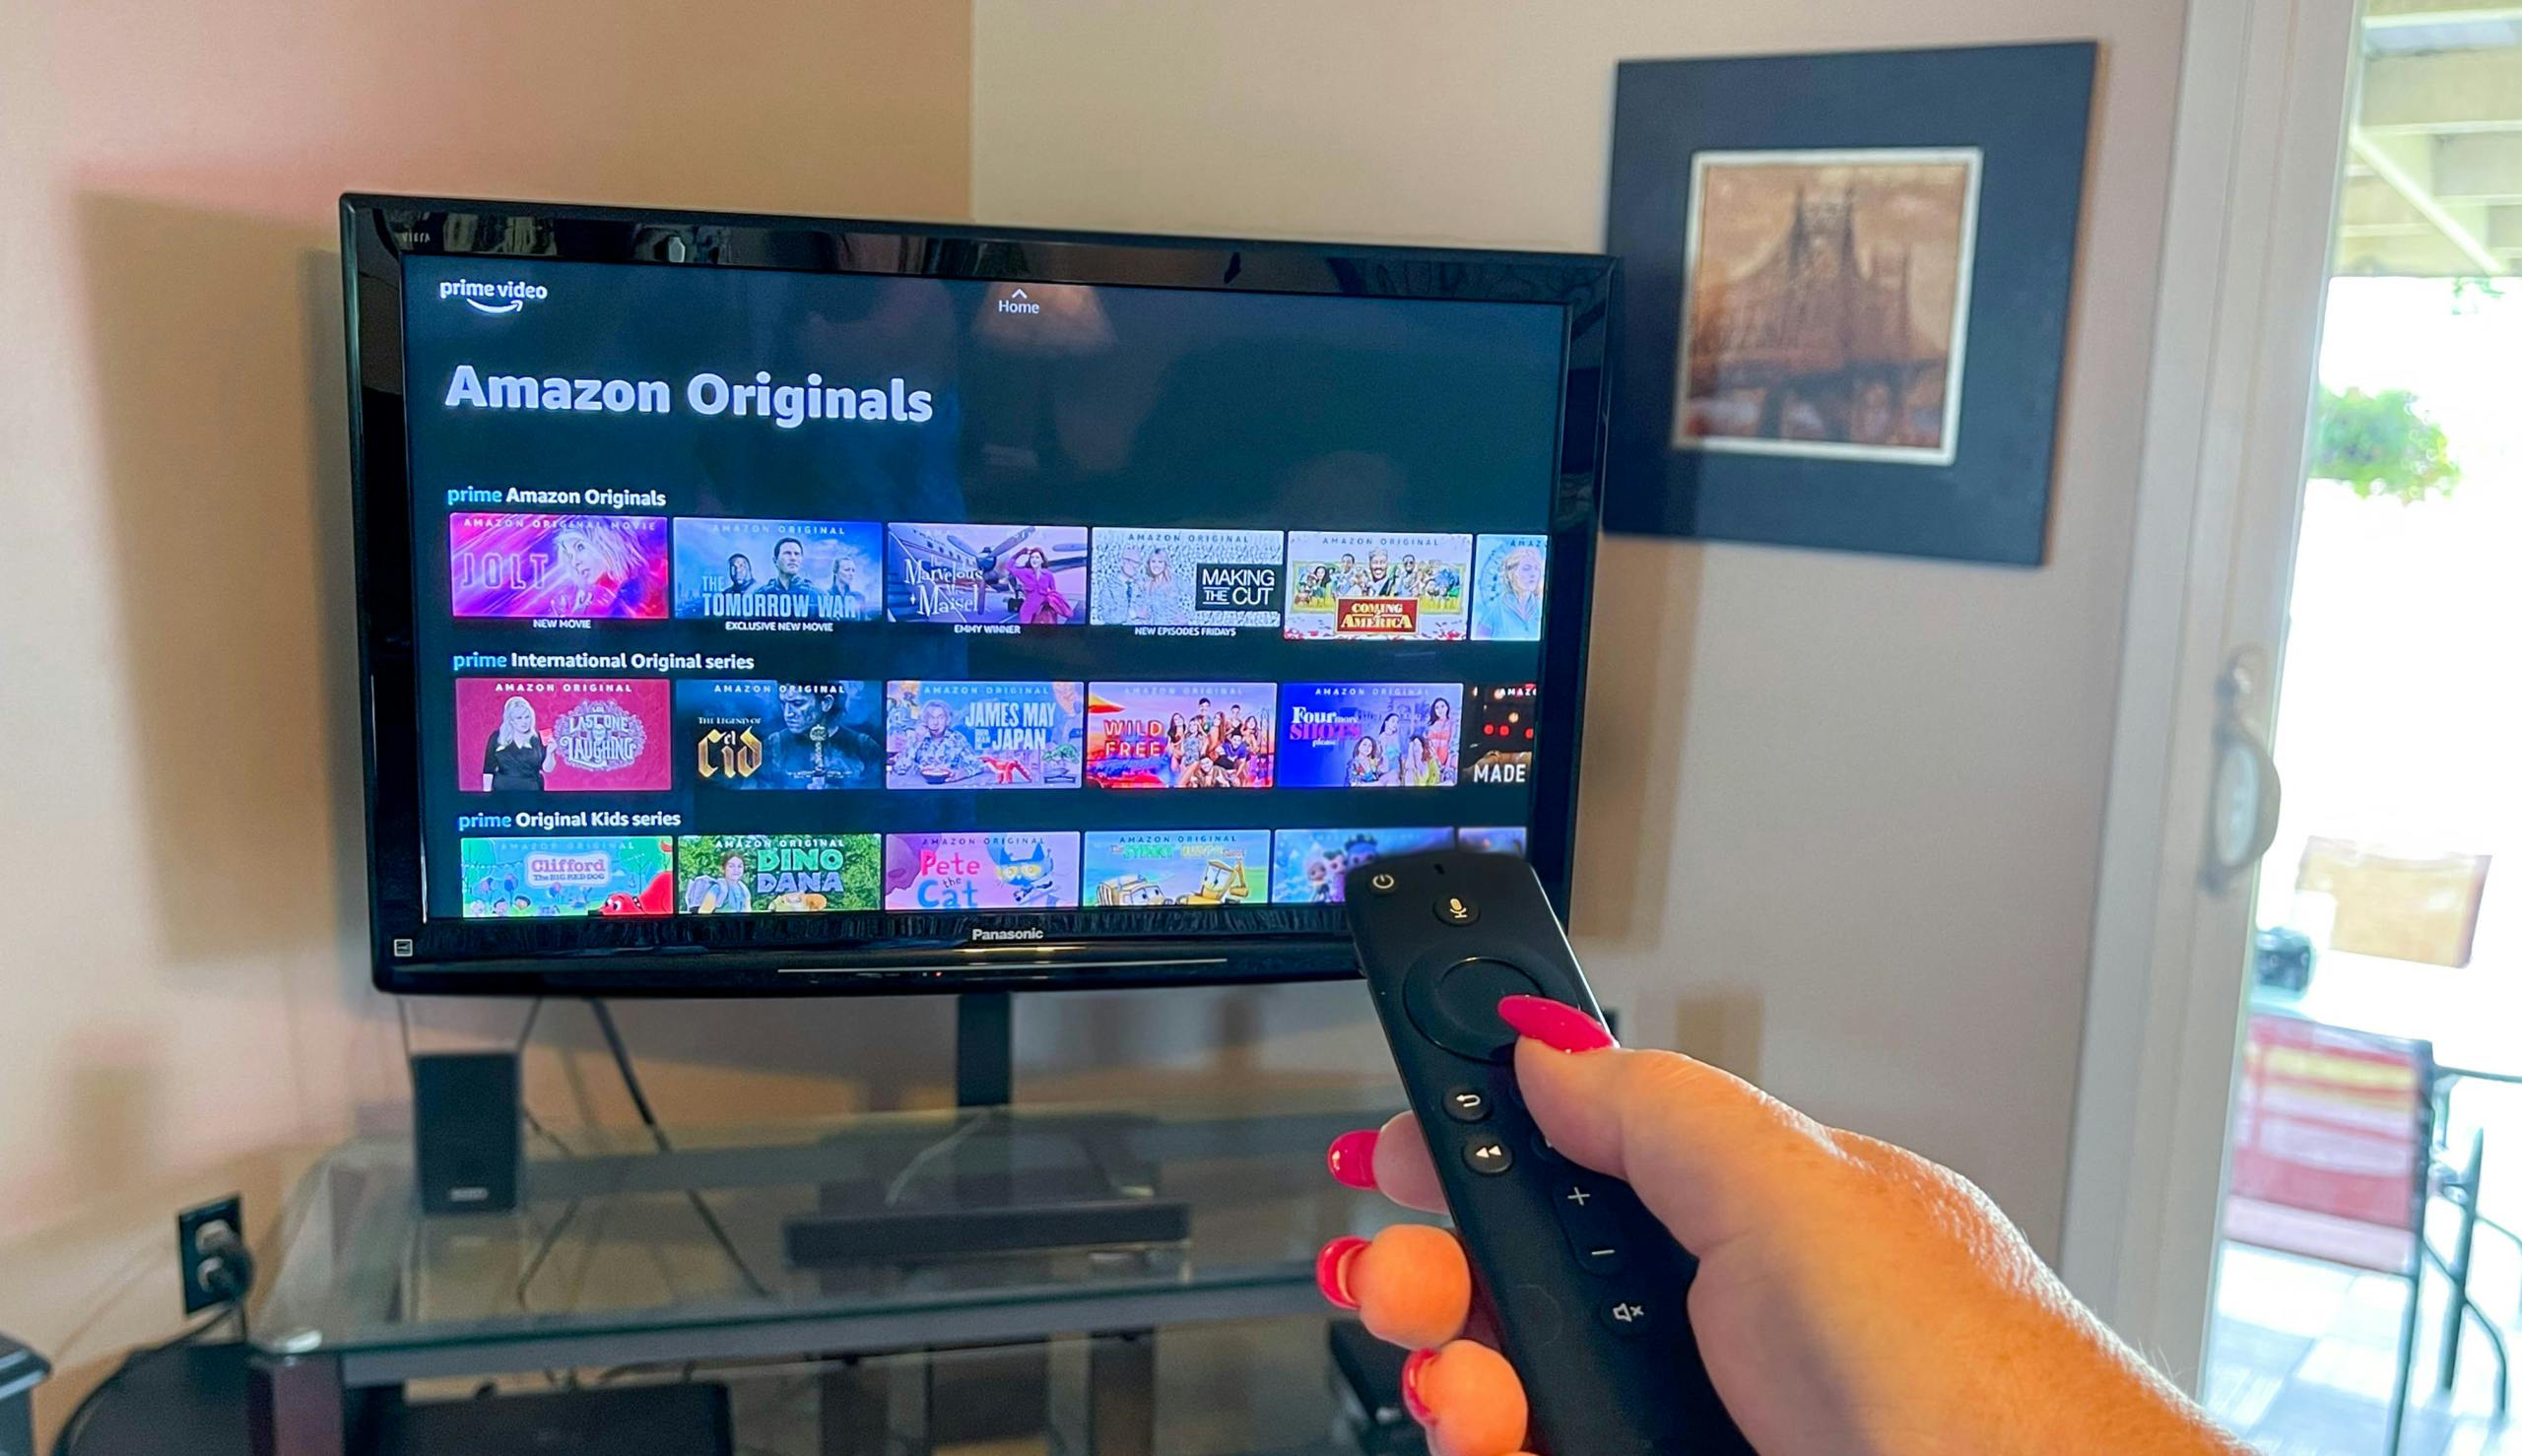 A person's hand holding an Amazon Fire remote, aiming it at a TV displaying Prime Video's Amazon Originals. 